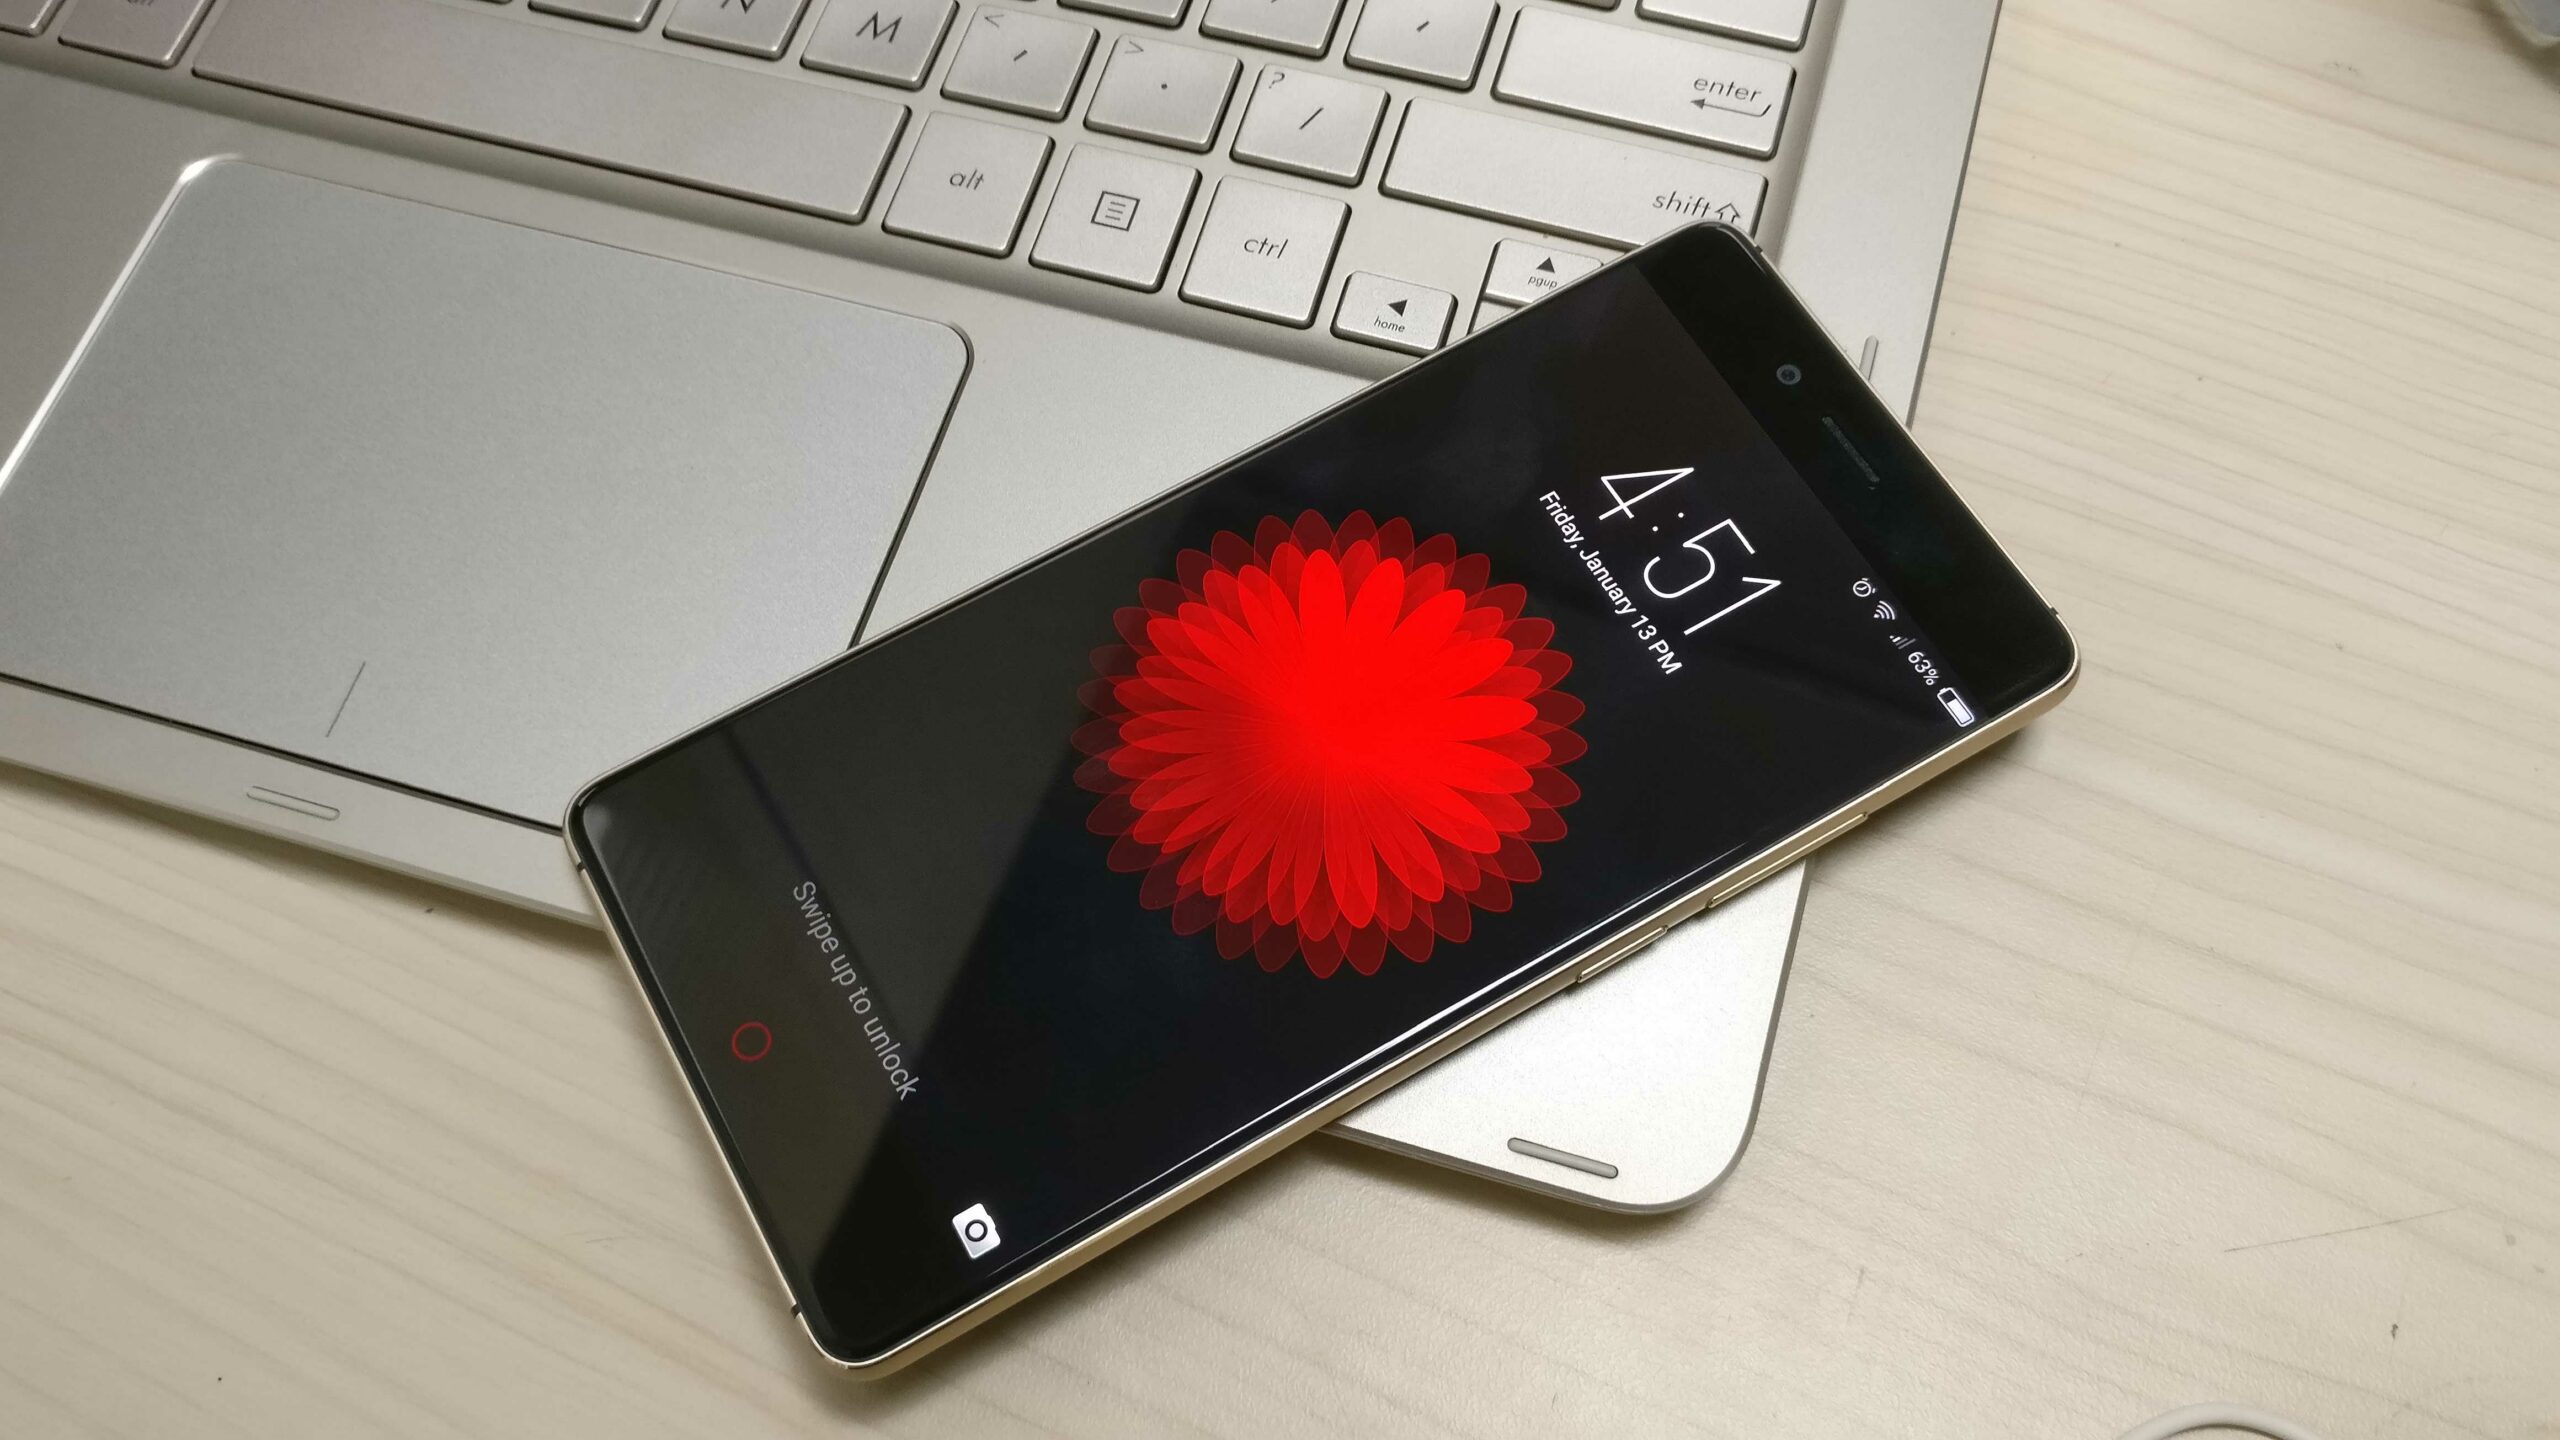 Nubia Z11 Review: A potential flagship-killer killed by its own software